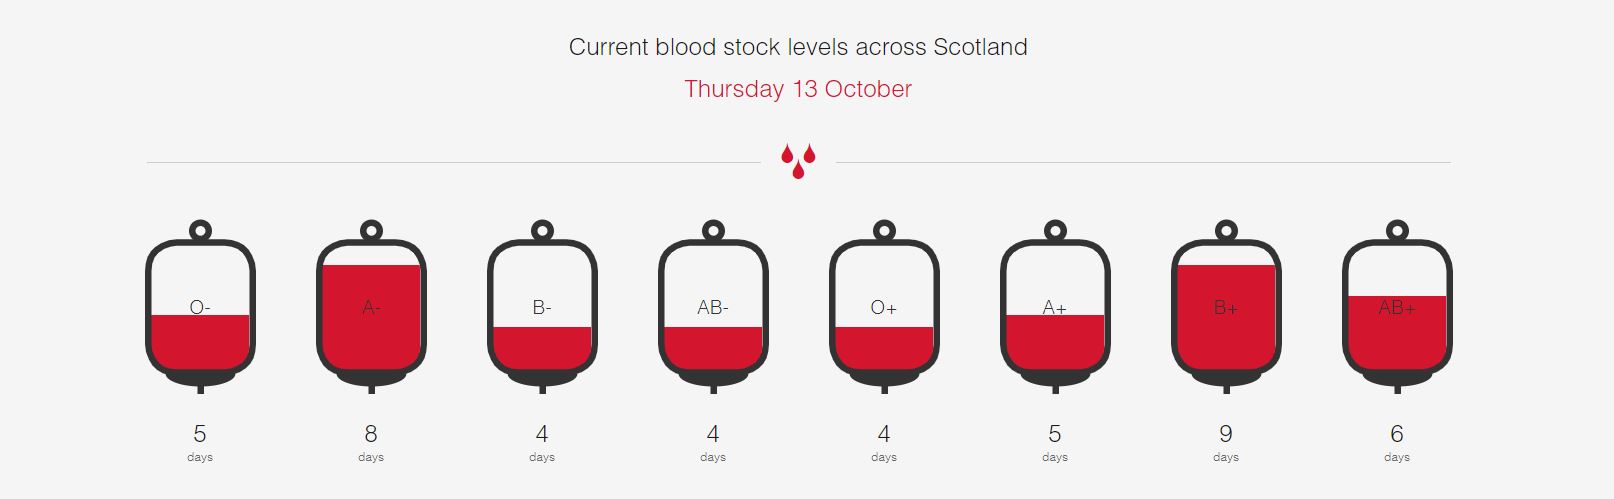 SNBTS aims to have at least five-to-seven days worth of stock of each blood group at all times.